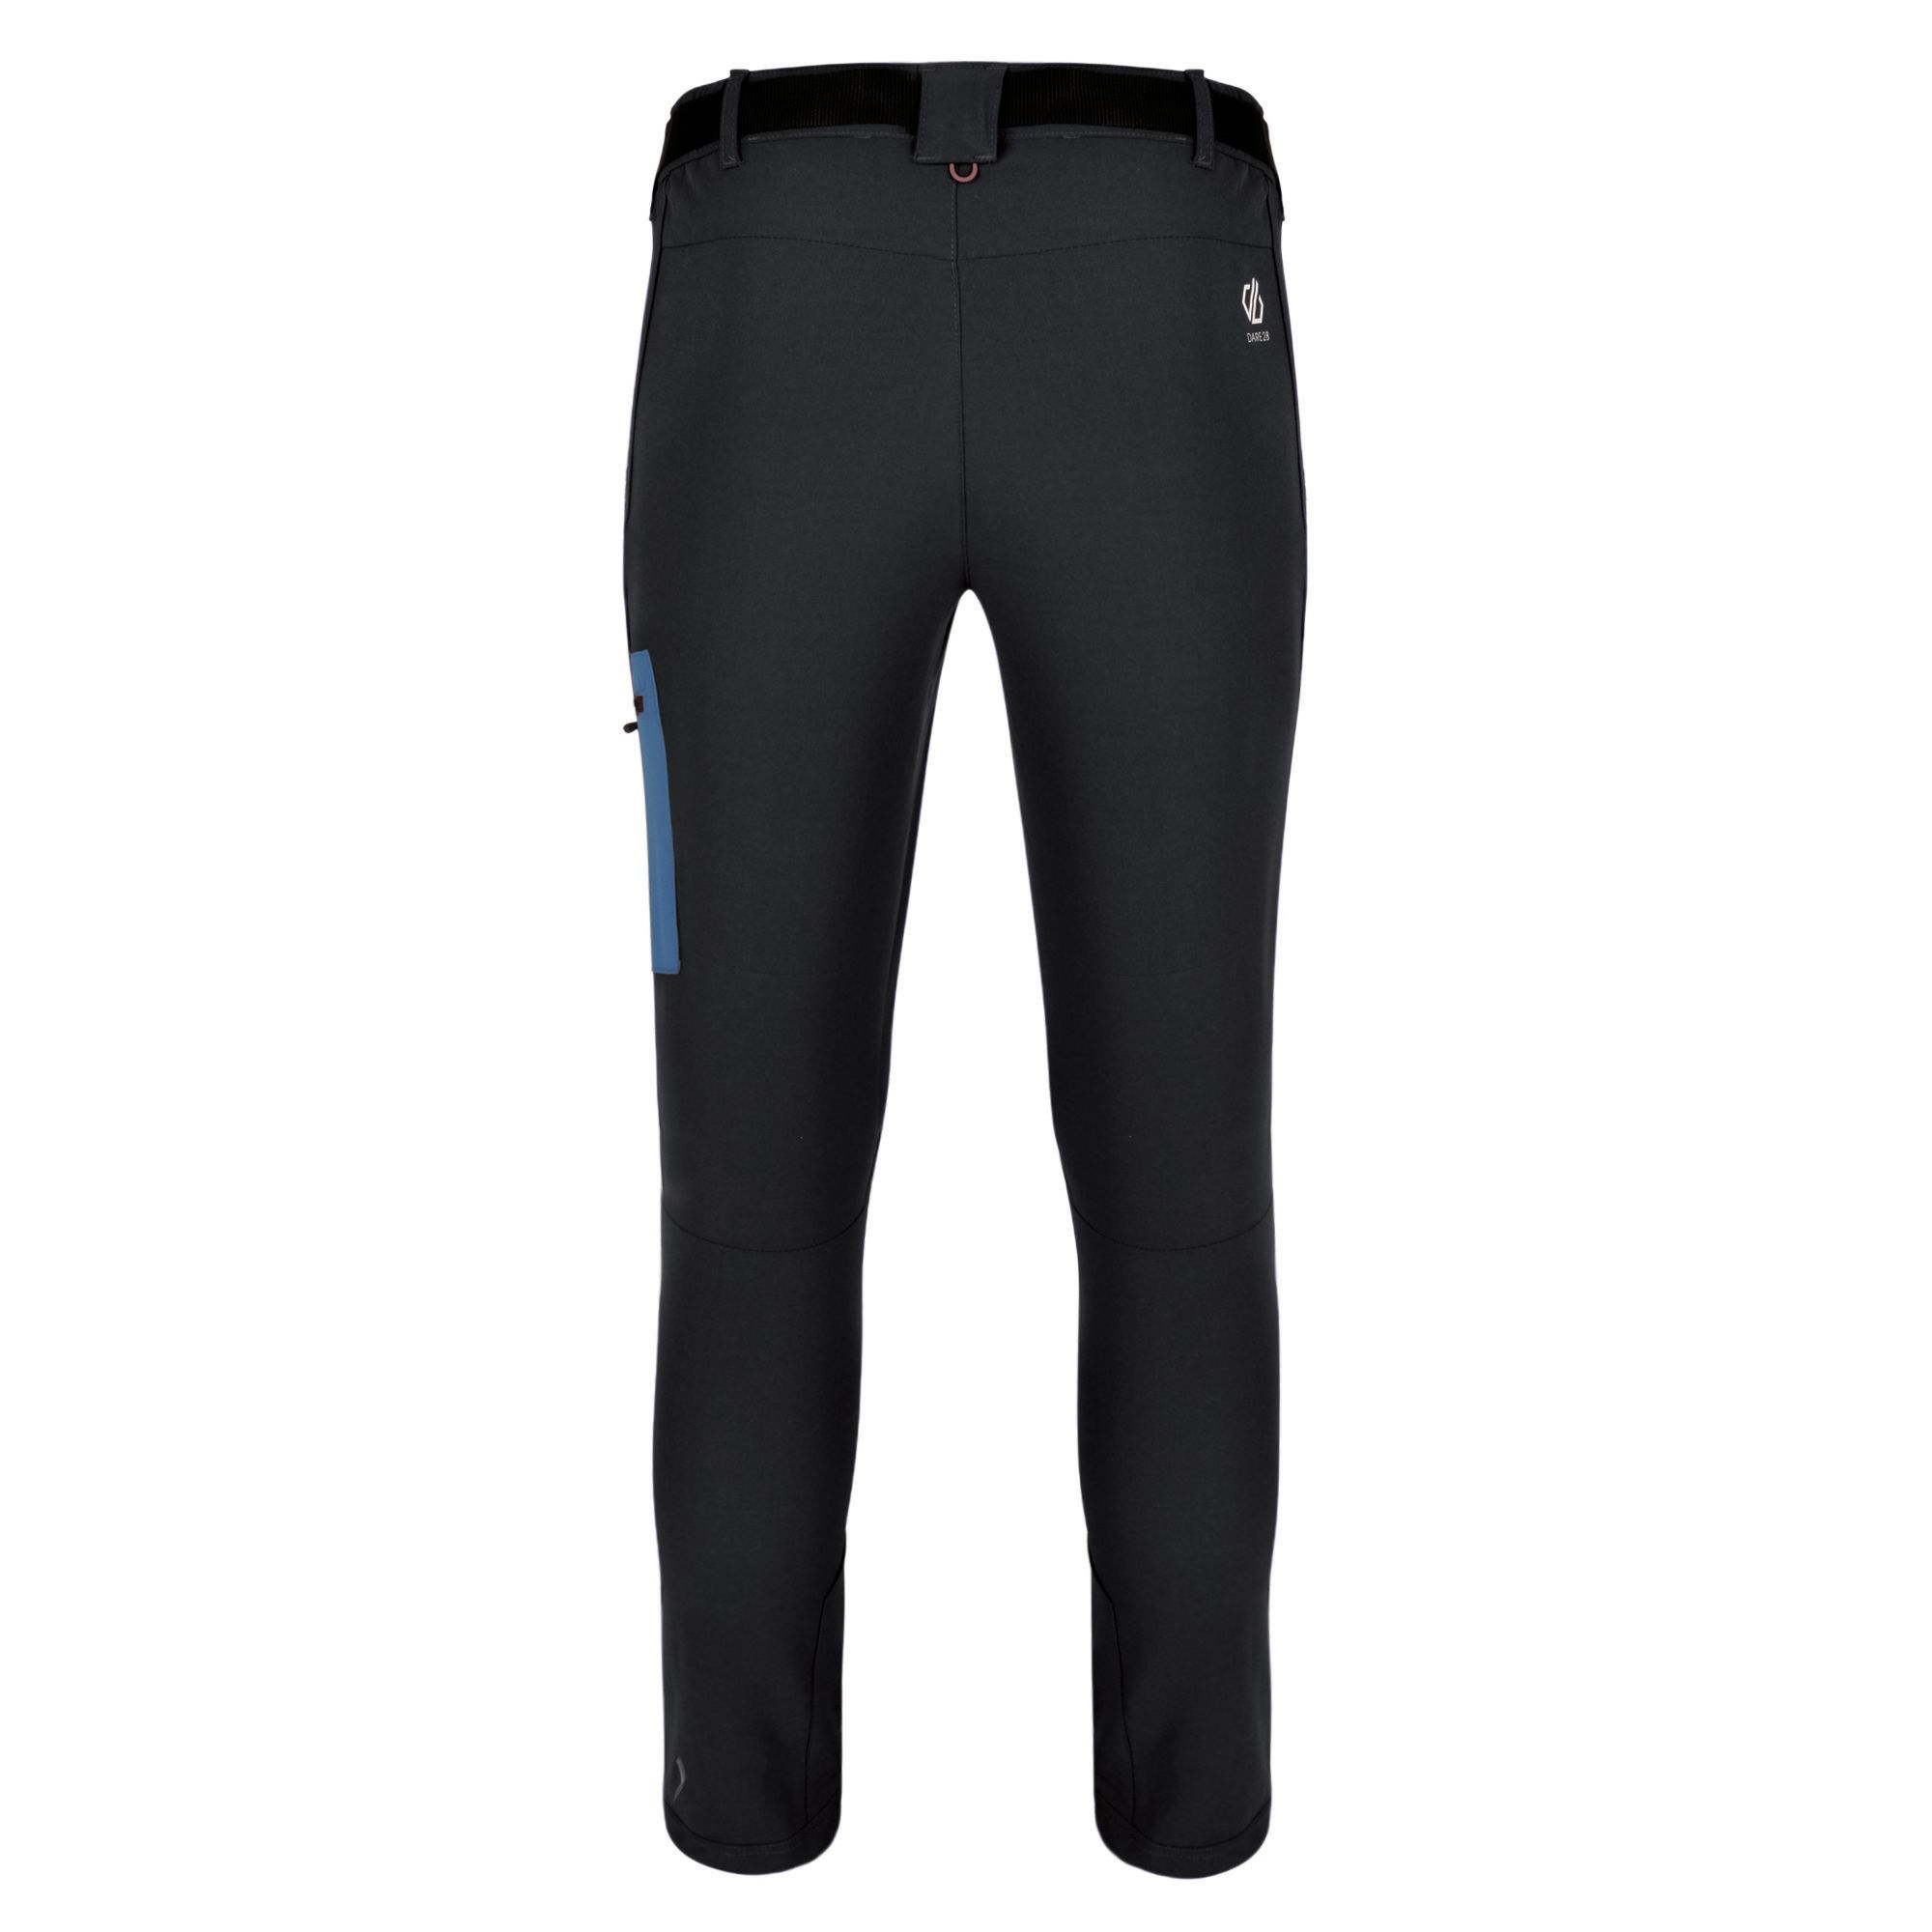 AEP Kinematics fit technology. Ilus Softshell stretch polyester fabric. Water repellent finish. Part elasticated waist and detachable webbing belt. 2 x zipped side pockets. 1 x zipped patch pocket. Zip fly opening. Zipped hem closure. Inside leg (length) 32in.